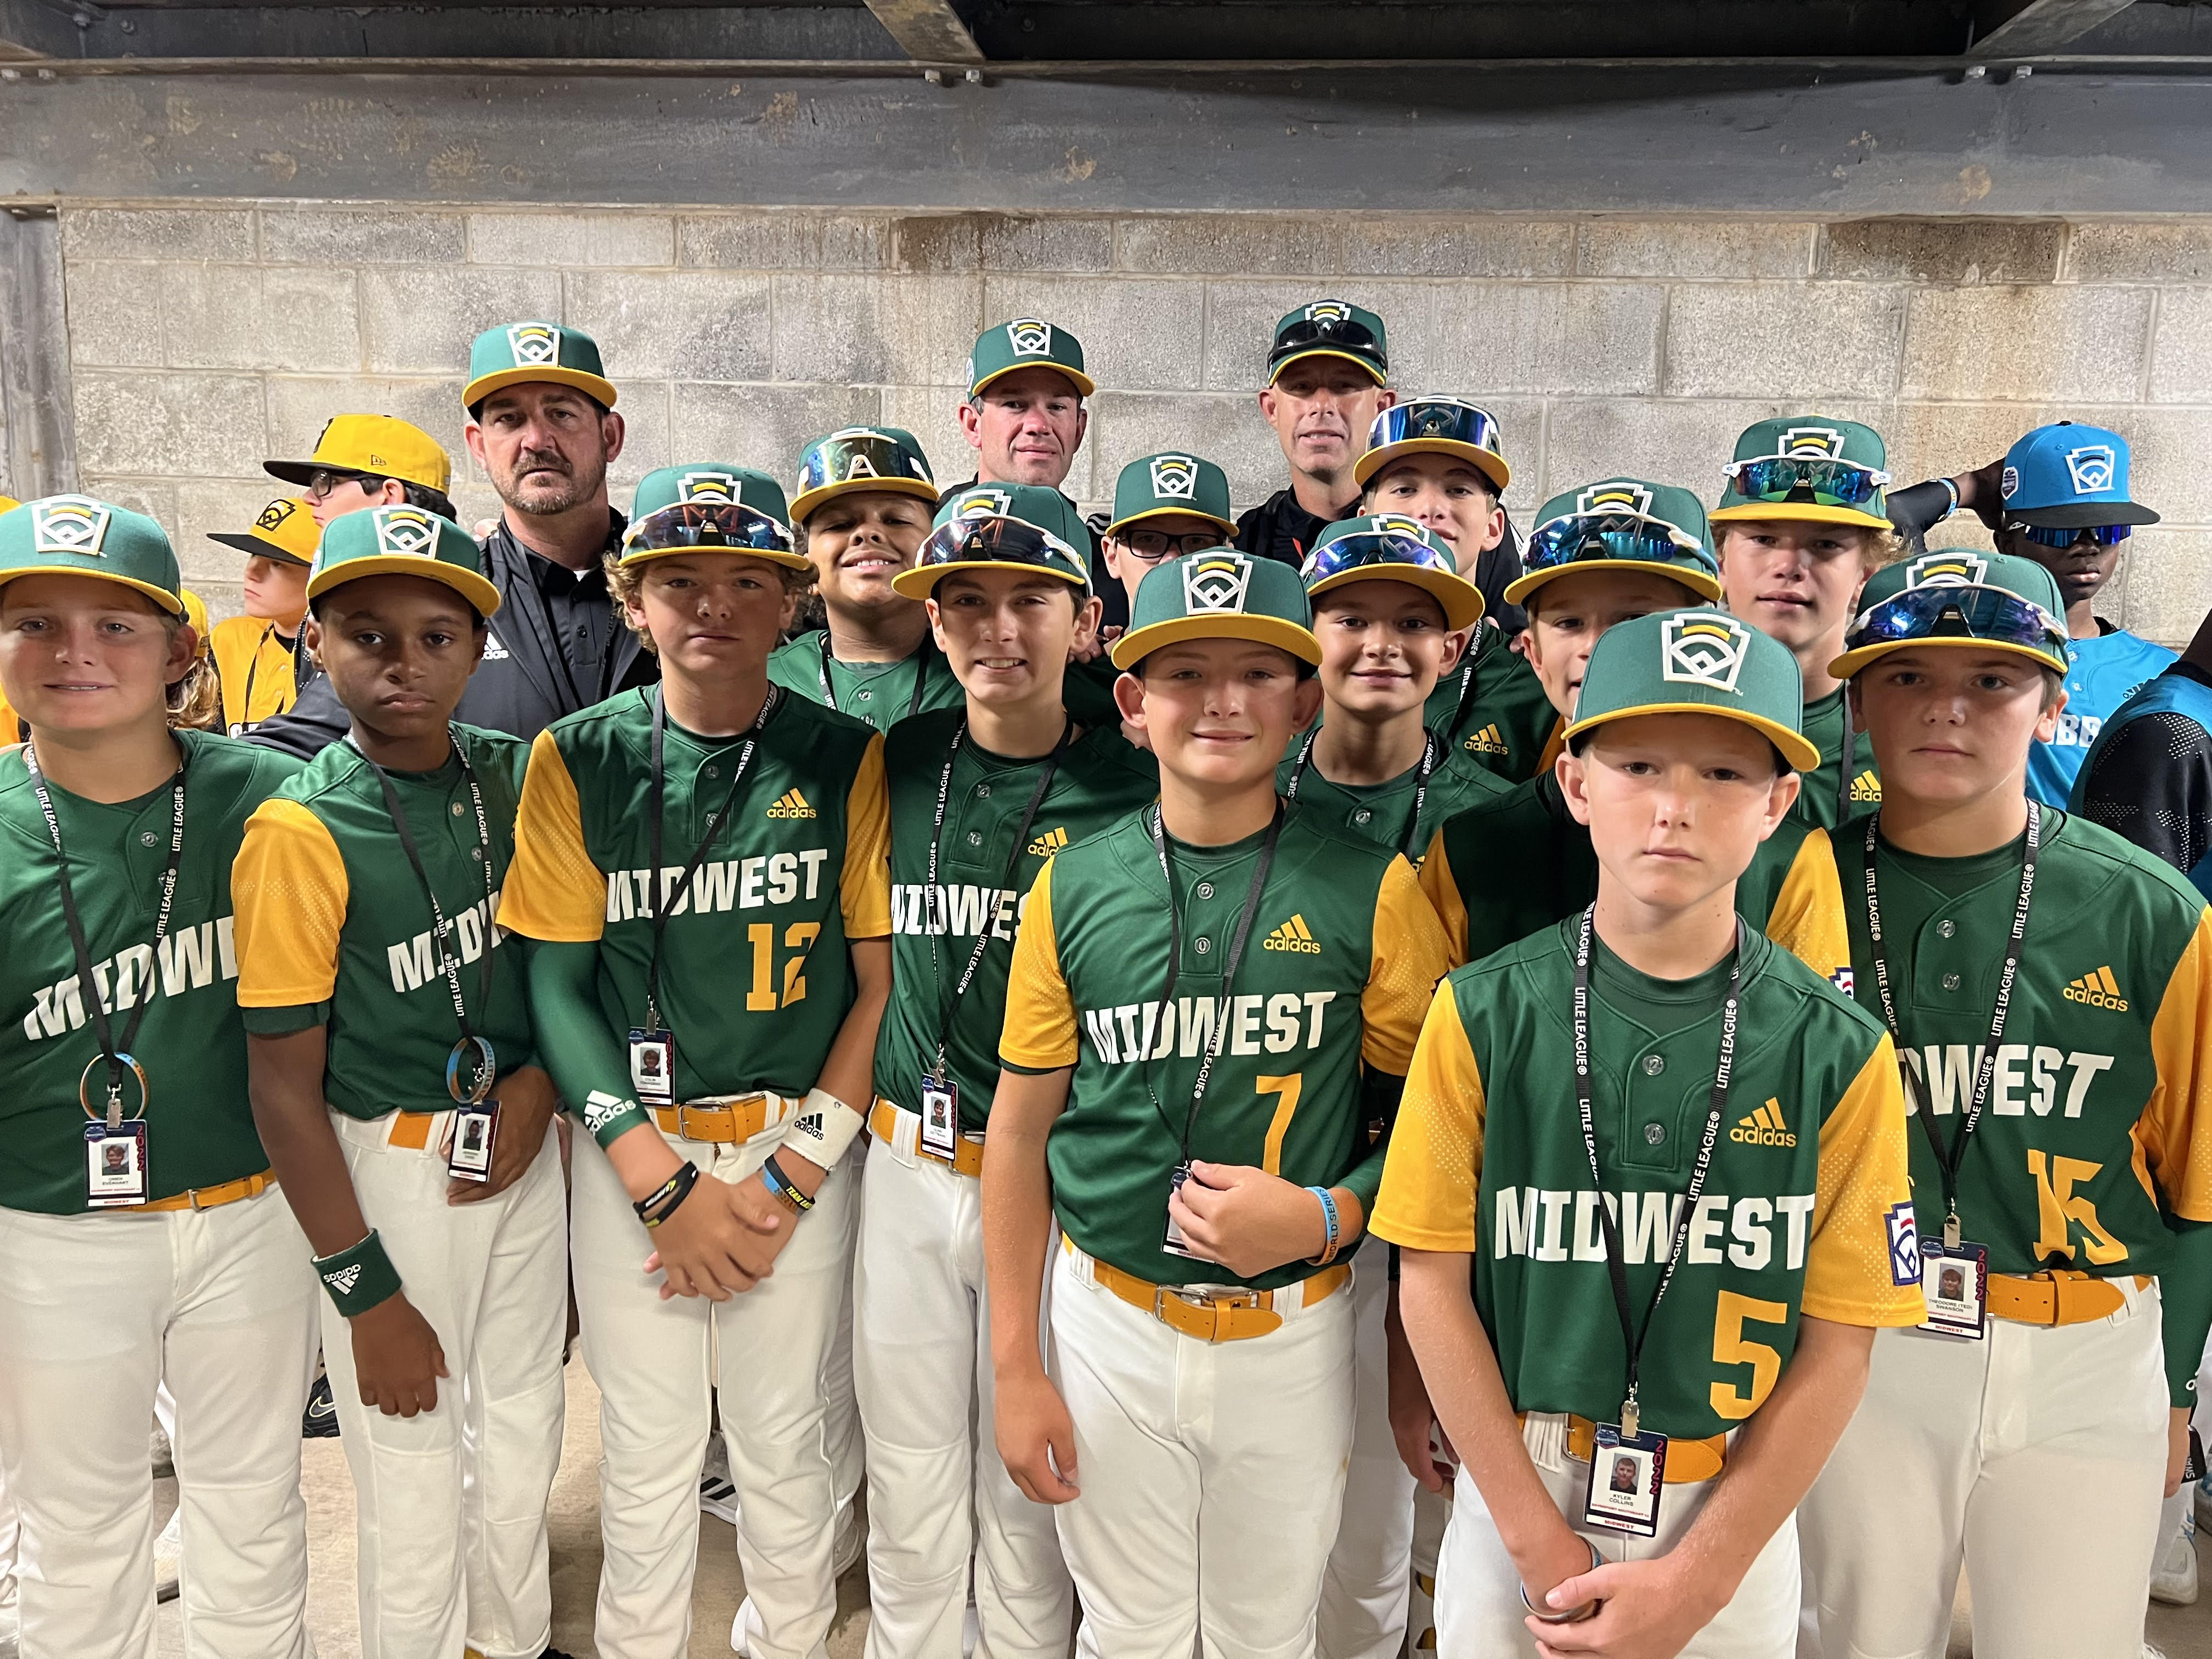 Hagerstown, Indiana, plays in 2022 Little League World Series